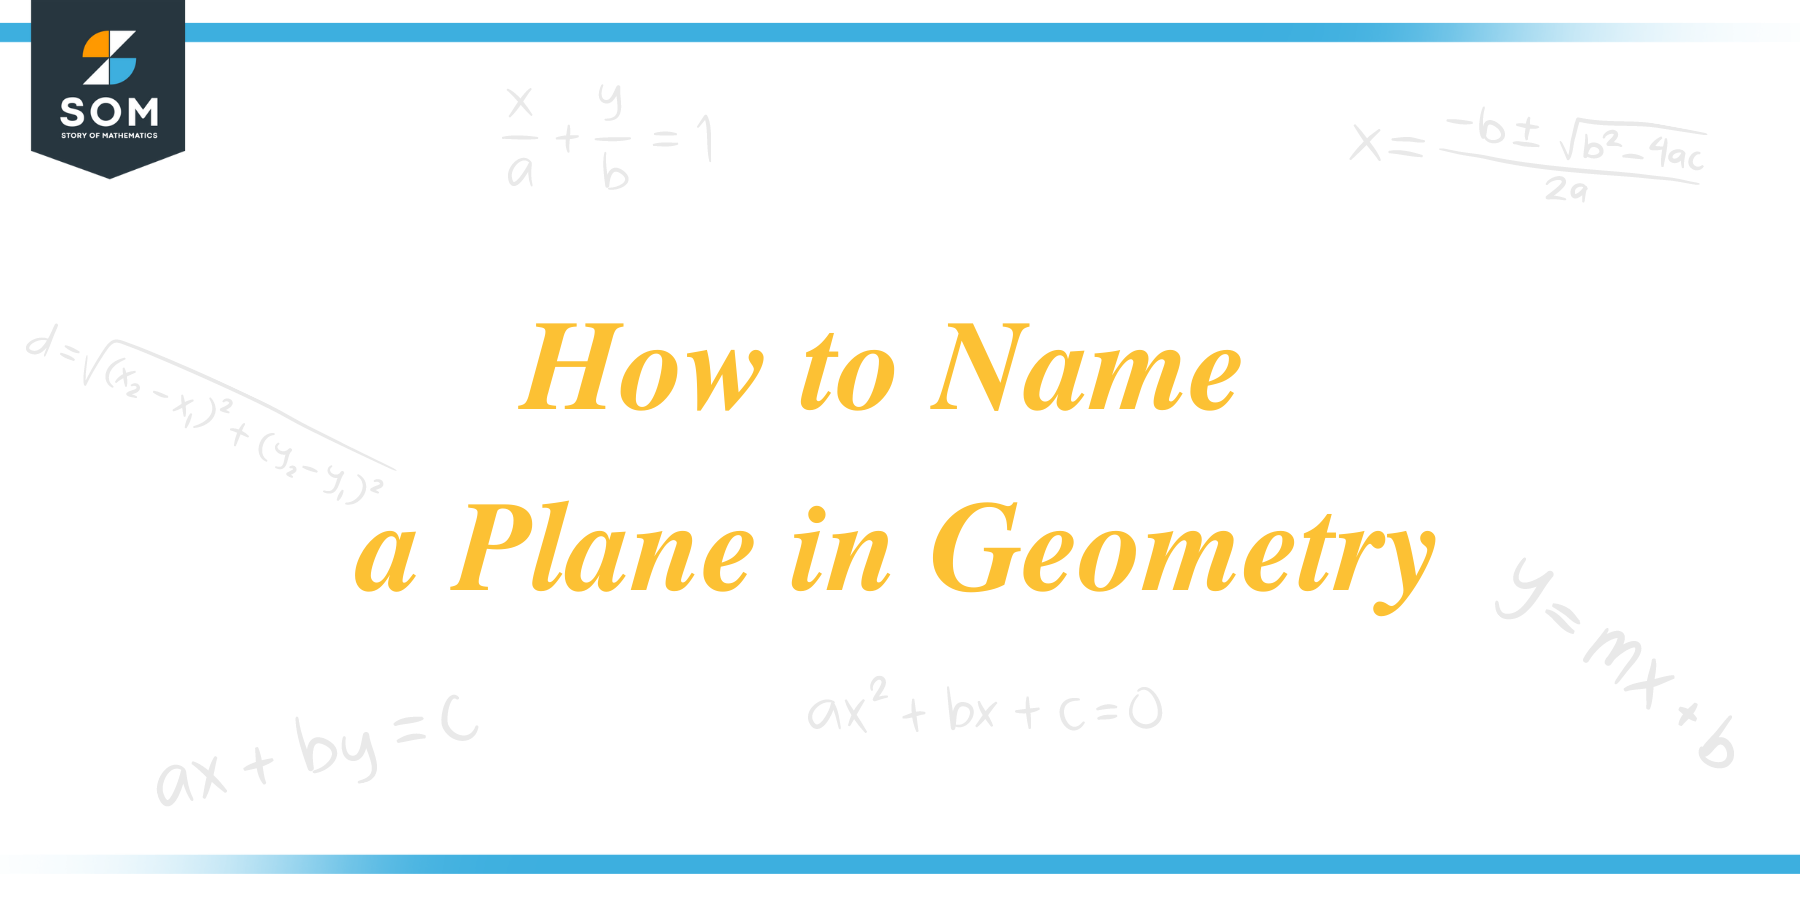 Name a plane in geometry title